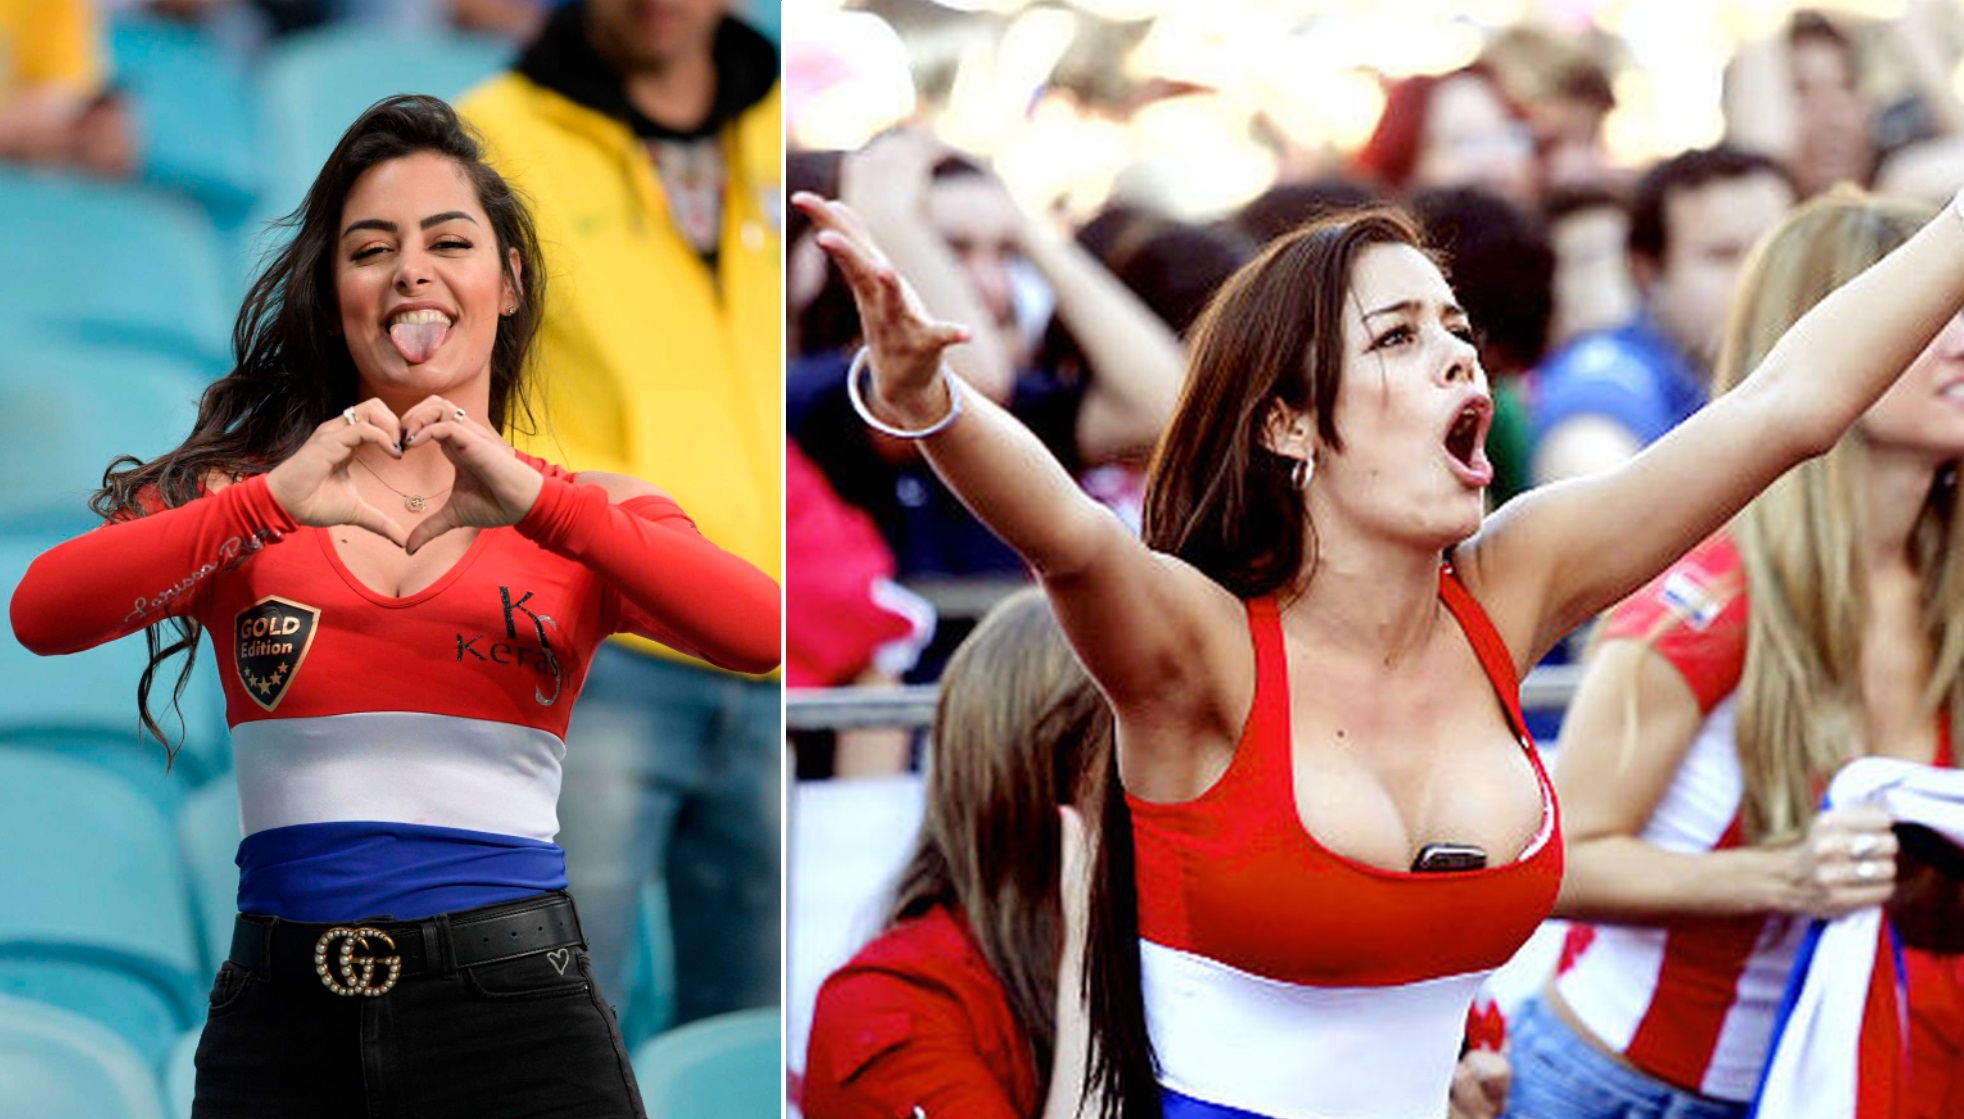 The Hottest Football Fans From Past FIFA World